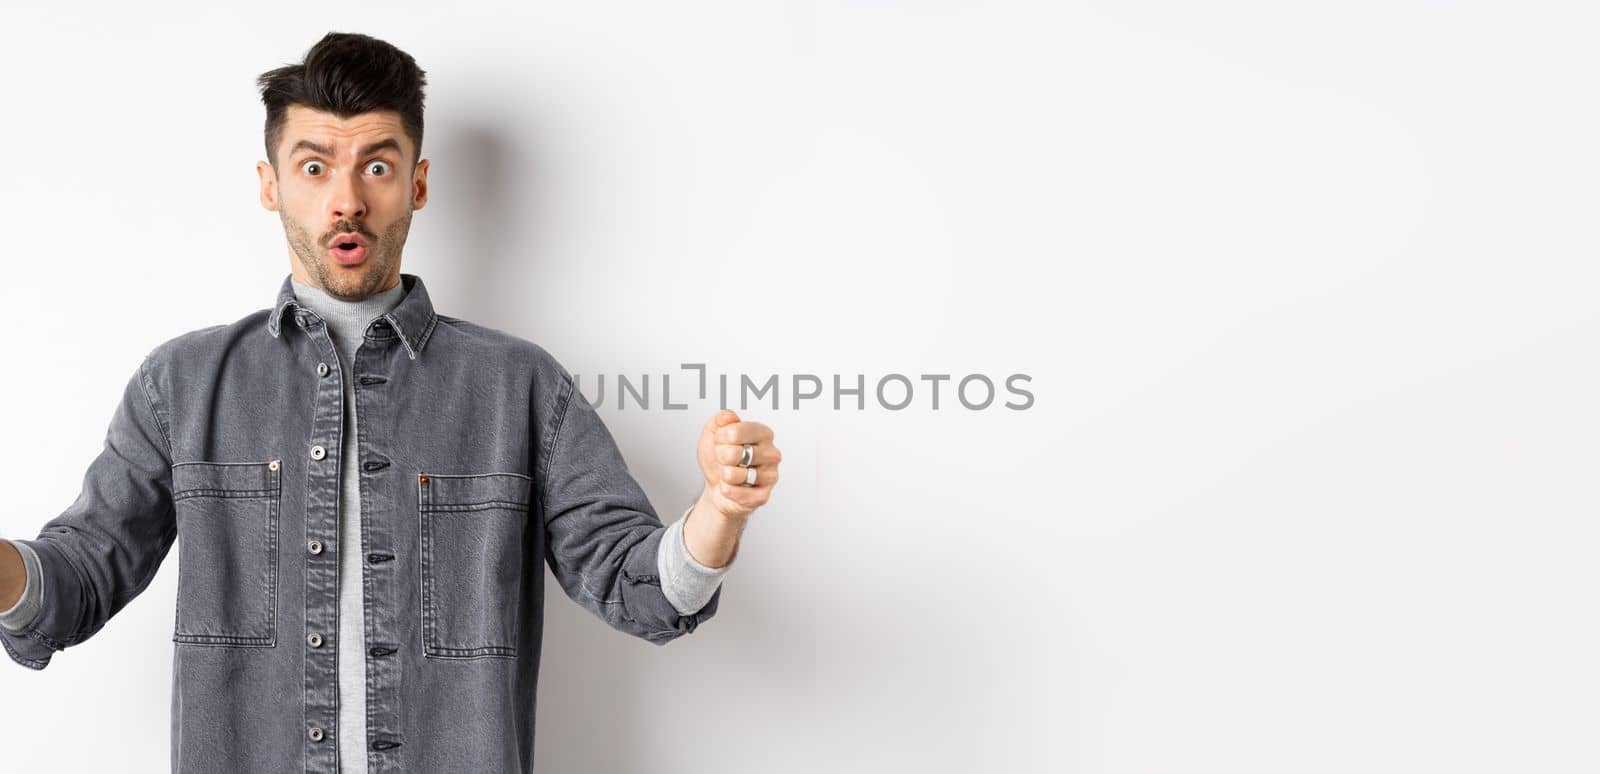 Confused man holding big size object and looking shocked, shaping large thing, standing on white background.